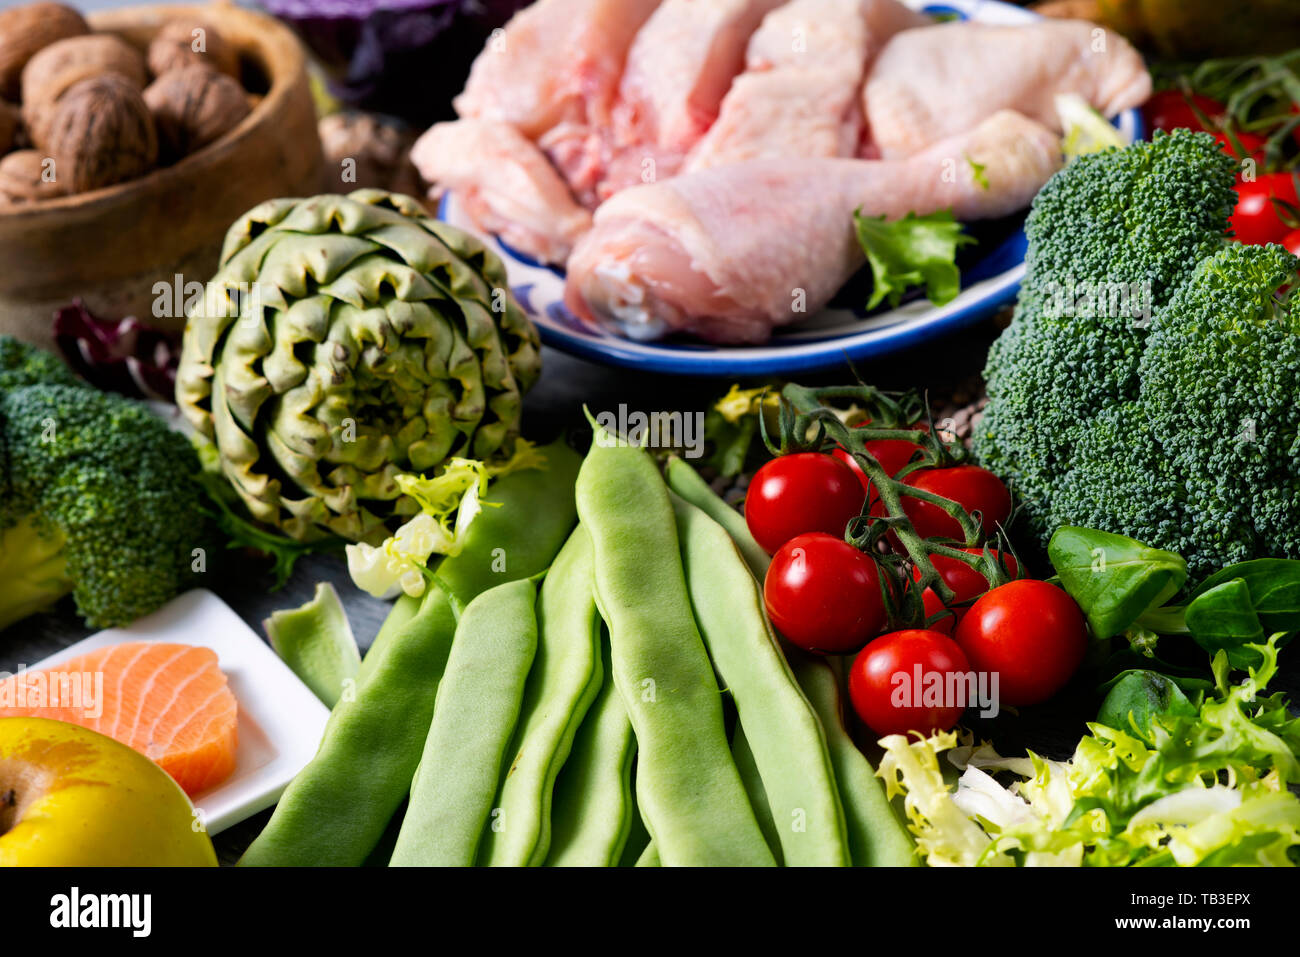 closeup of a pile of unprocessed food, such as different raw fruits and vegetables, some legumes and nuts, some pieces of chicken and fish, on a table Stock Photo